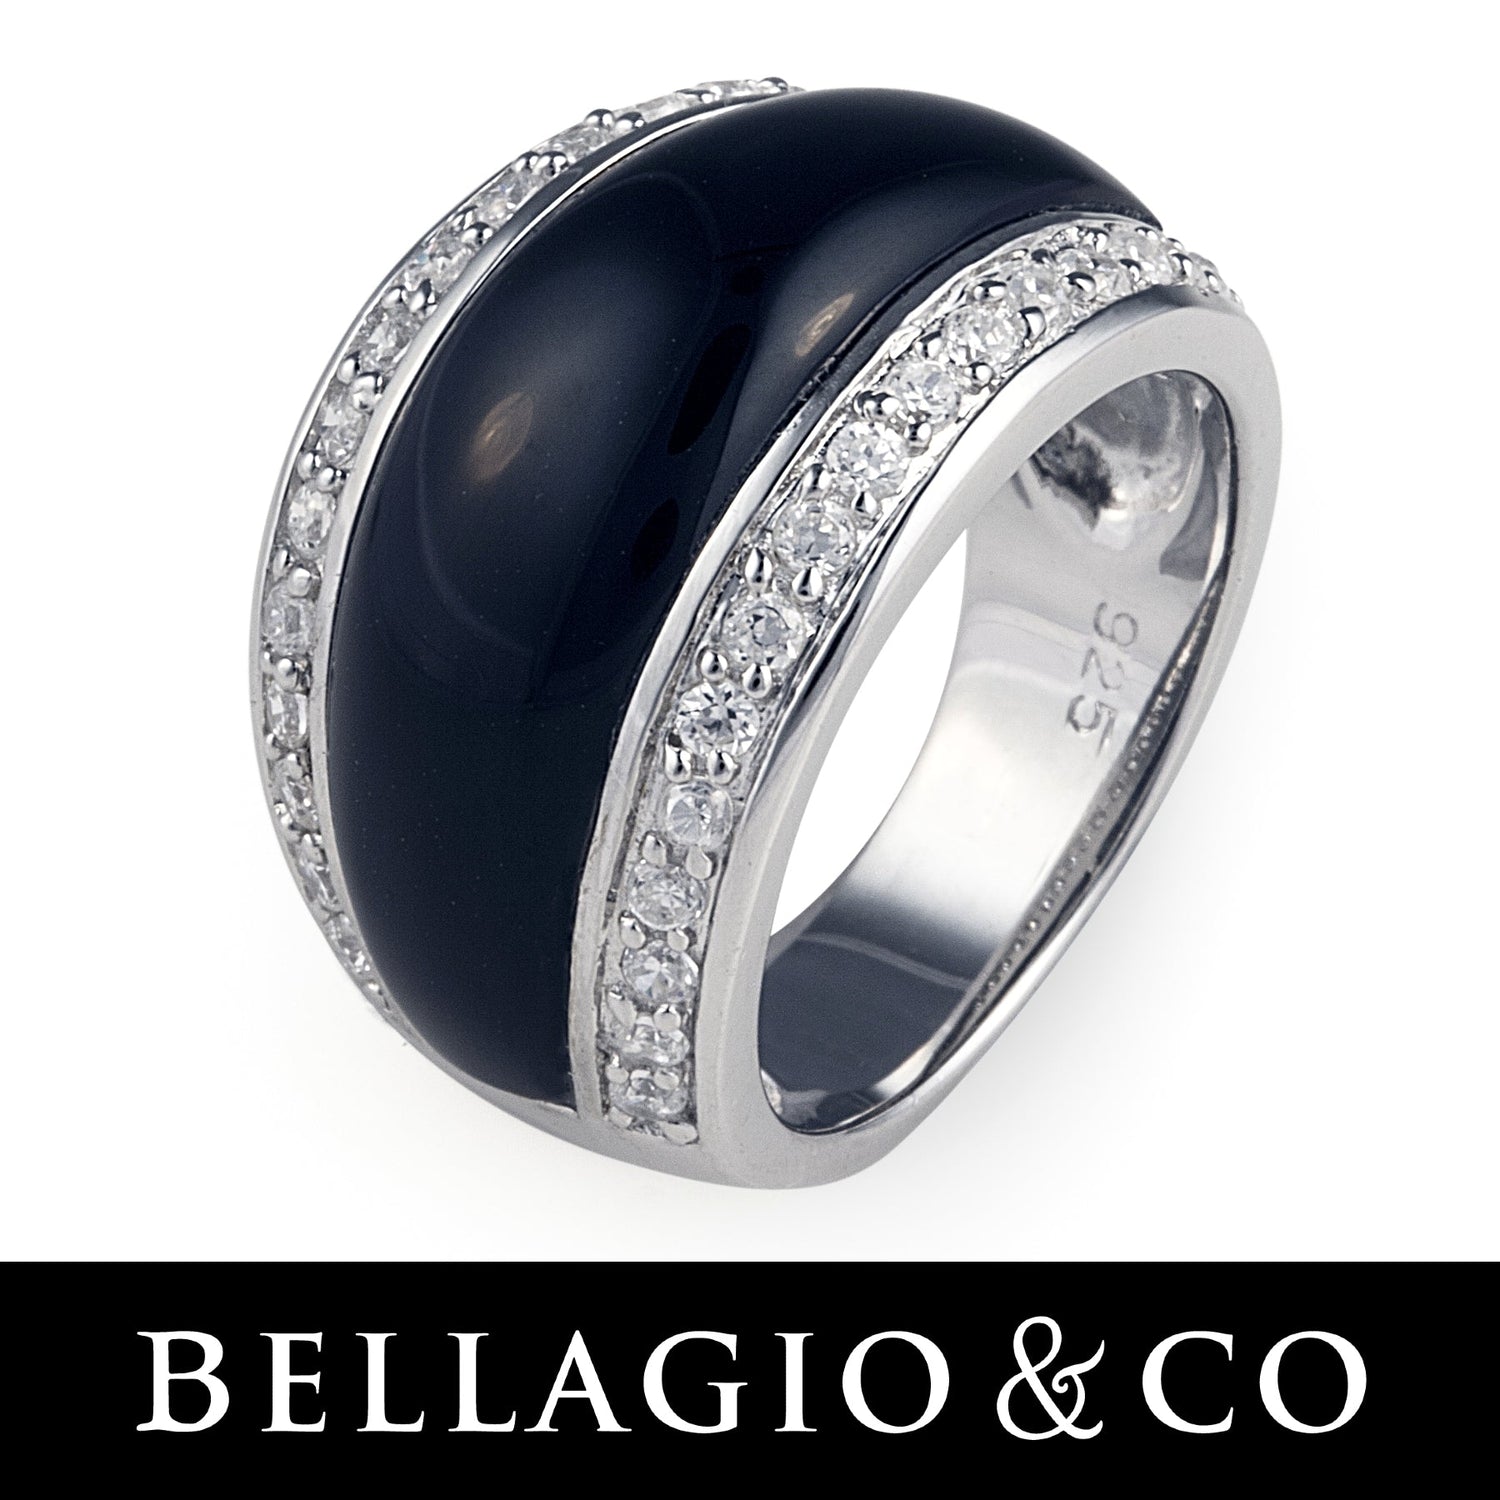 Shop our range of jewellery with beautiful Black Onyx stones. Luxury jewellery by Bellagio & Co. Worldwide Shipping plus FREE shipping for orders over $150.00 within Australia.